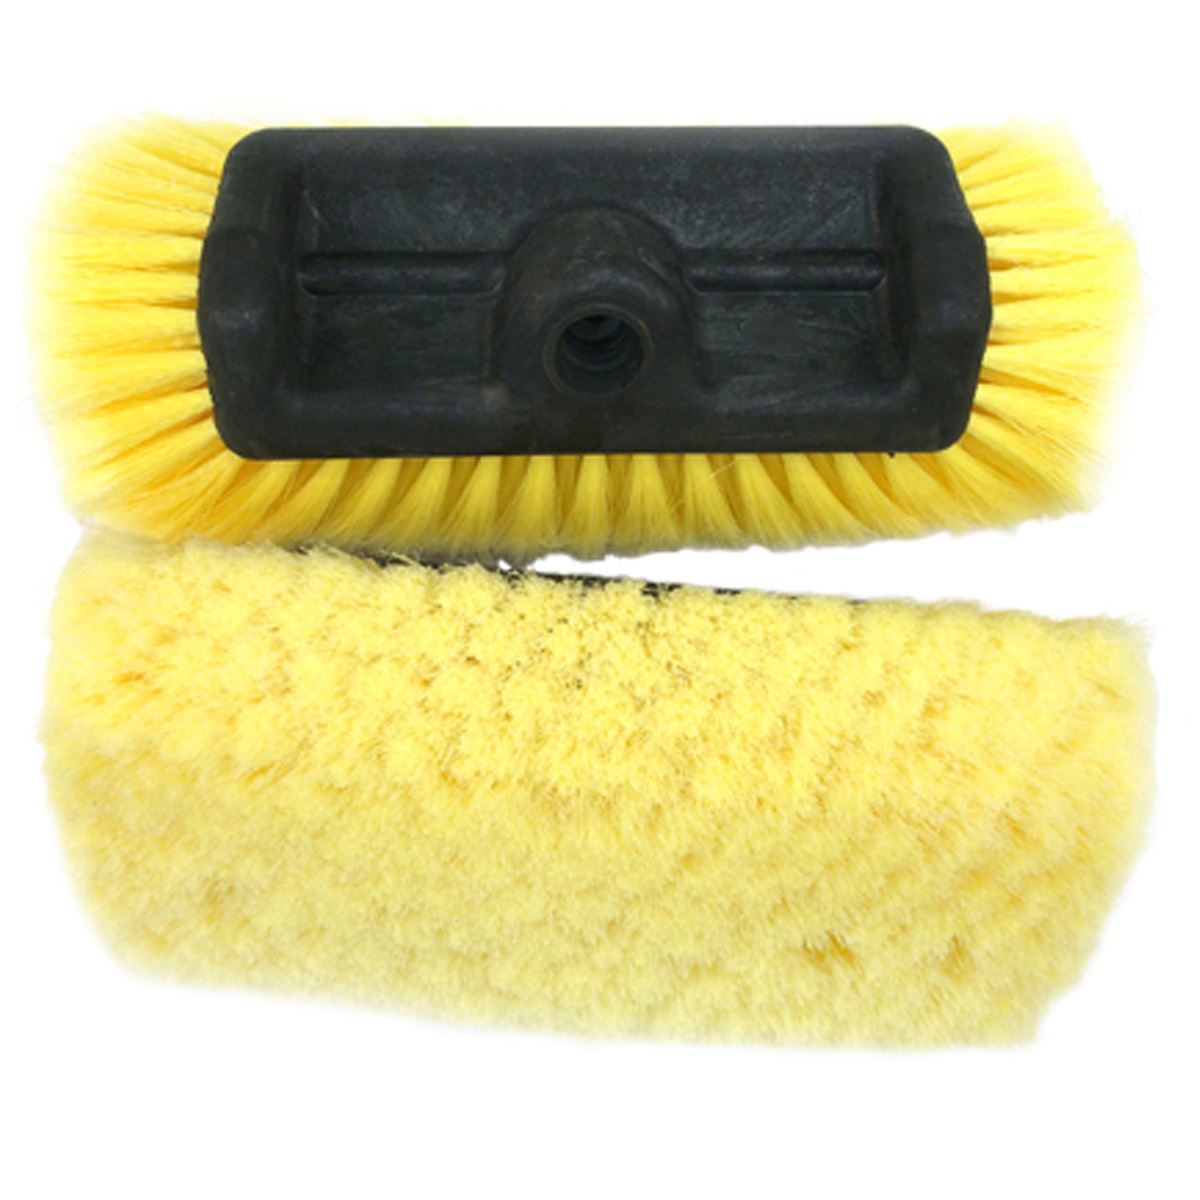 TRUCK WASH BRUSH- TRILEVEL. Professional Detailing Products